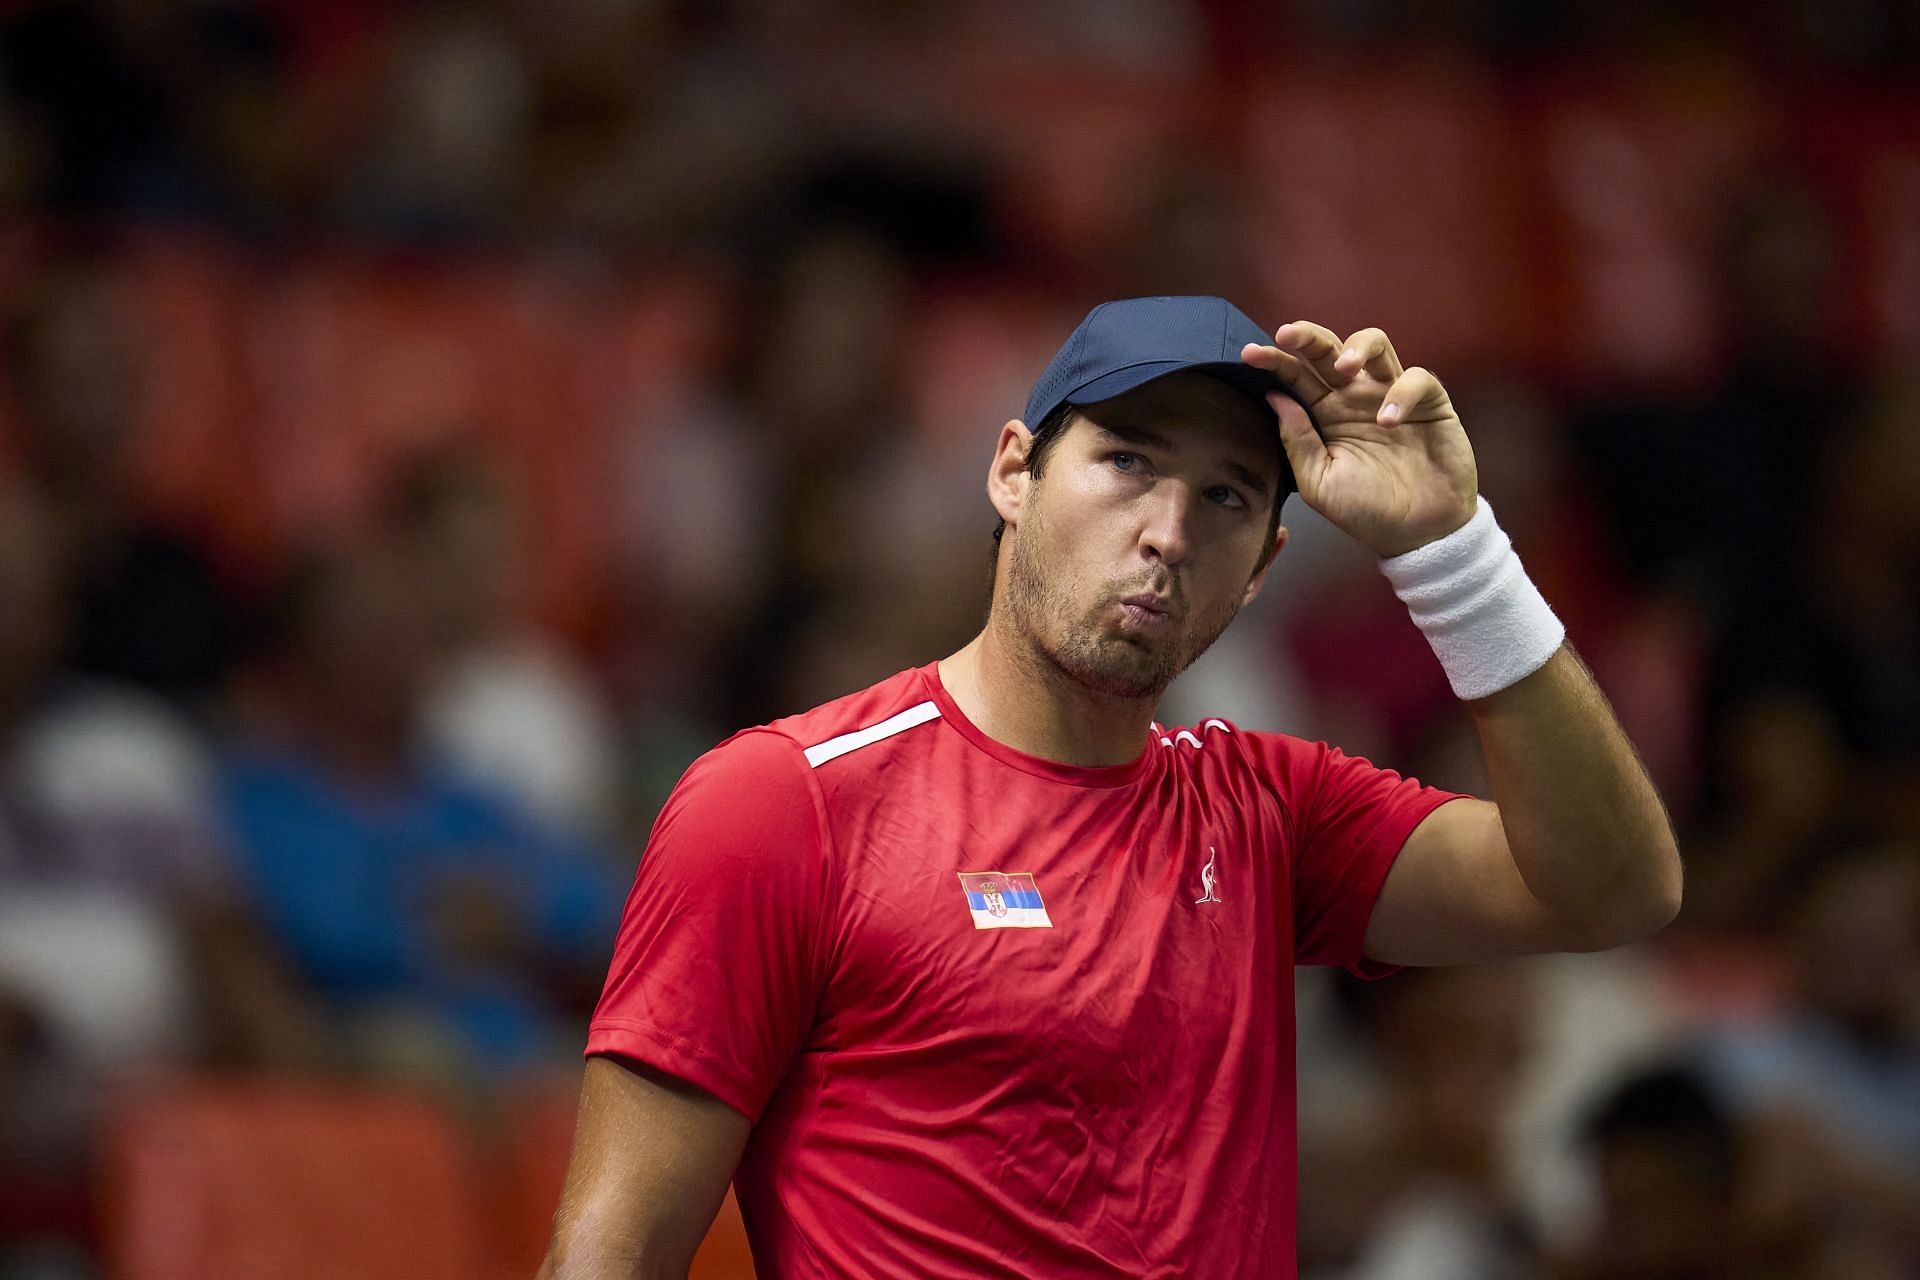 Dusan Lajovic will also in be in action on the penultimate day of the Barcelona Open 